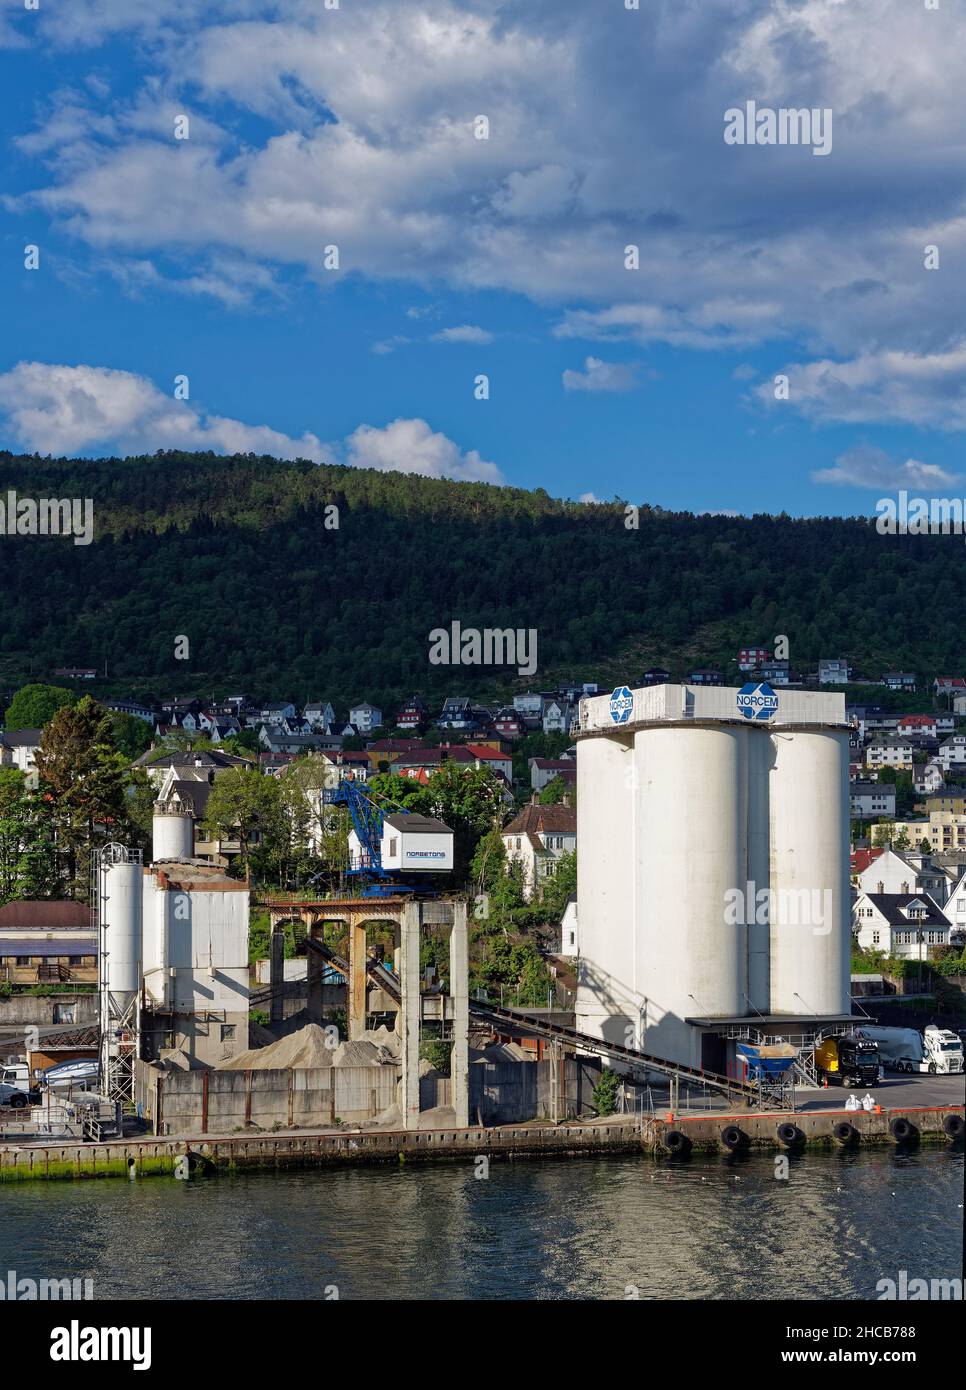 The Norcem Cement Factory and Silos set alongside Bergens waterfront with Houses and commercial property beside it amongst the trees. Stock Photo